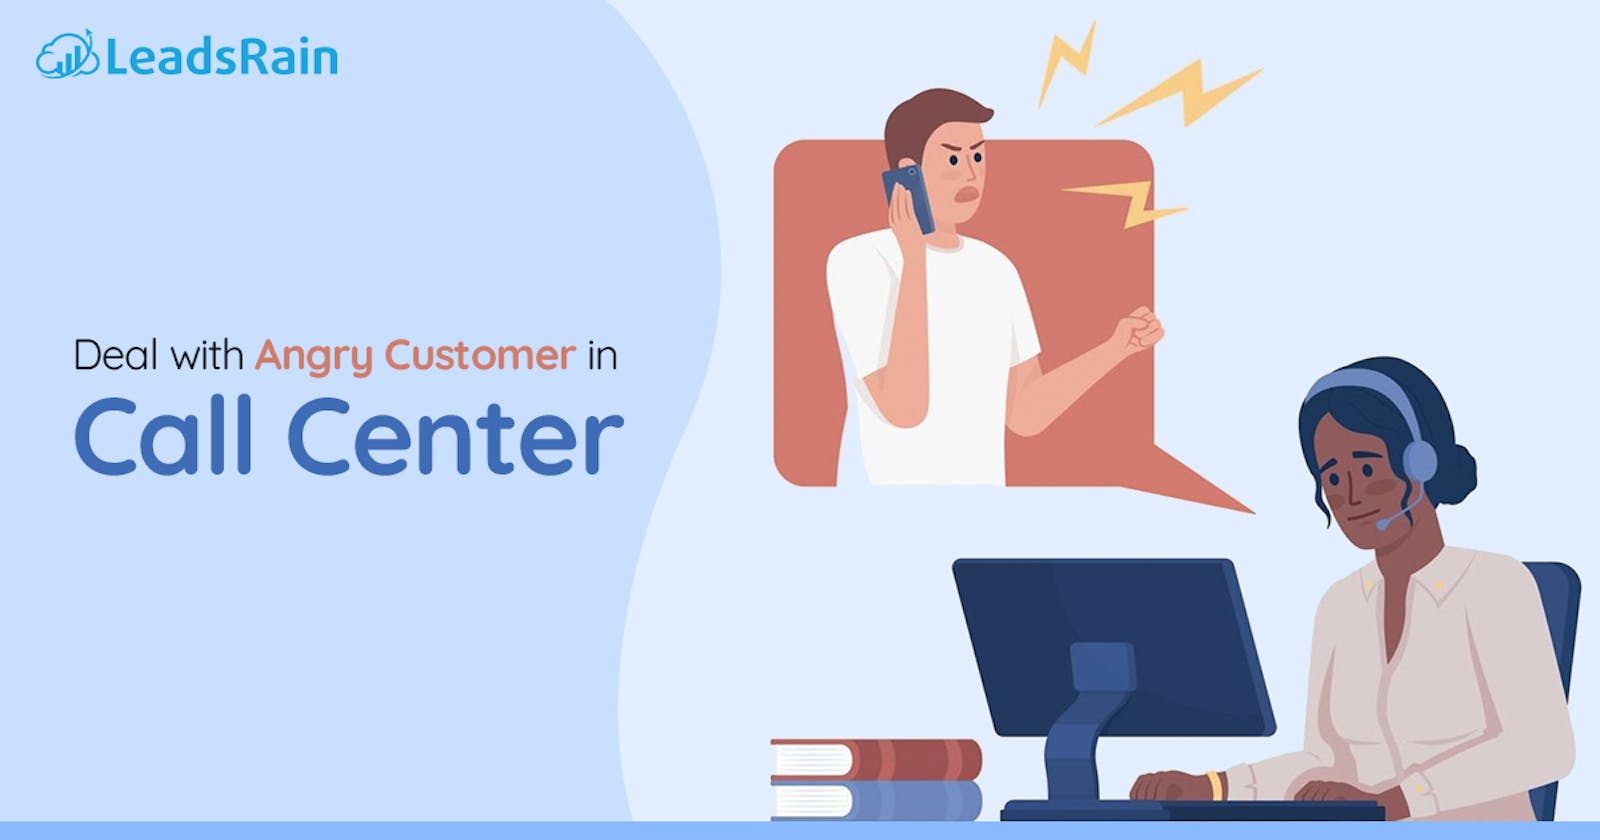 How to handle angry customers in a call center